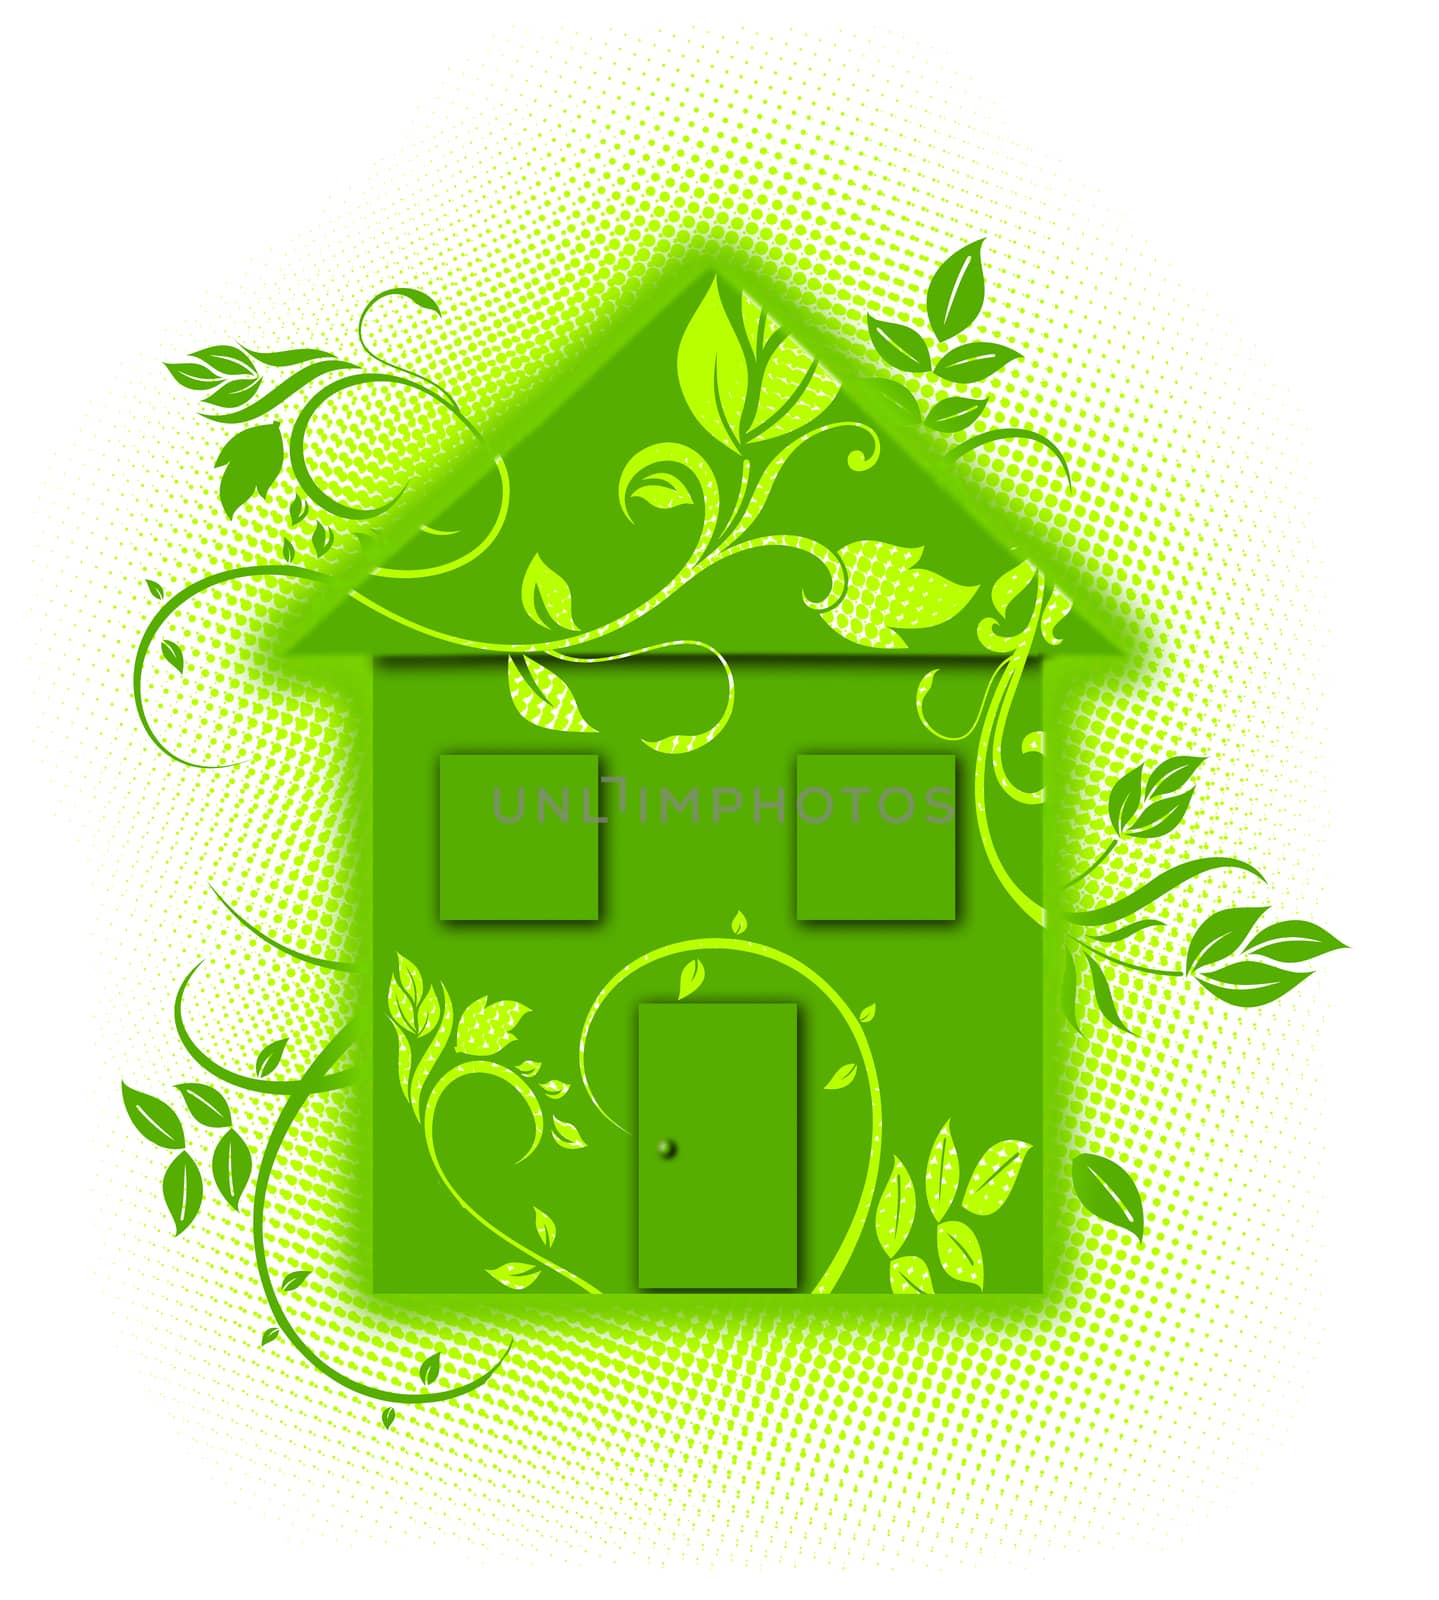 green floral eco house illustration by sette